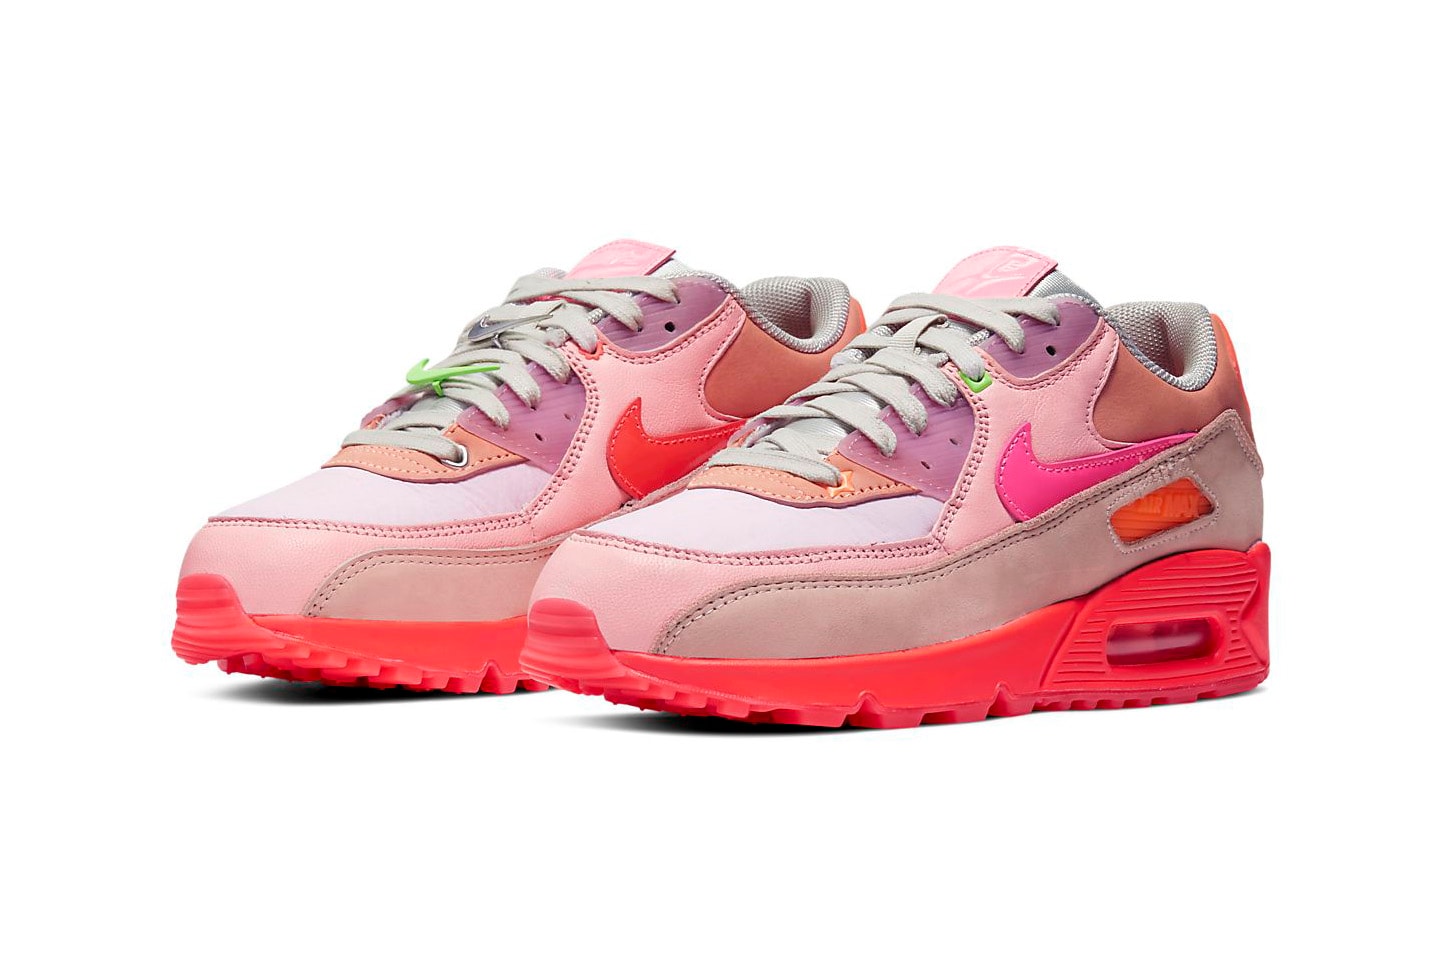 Nike Air Max 90 Bright Crimson Removable Swoosh Neon Pink Red